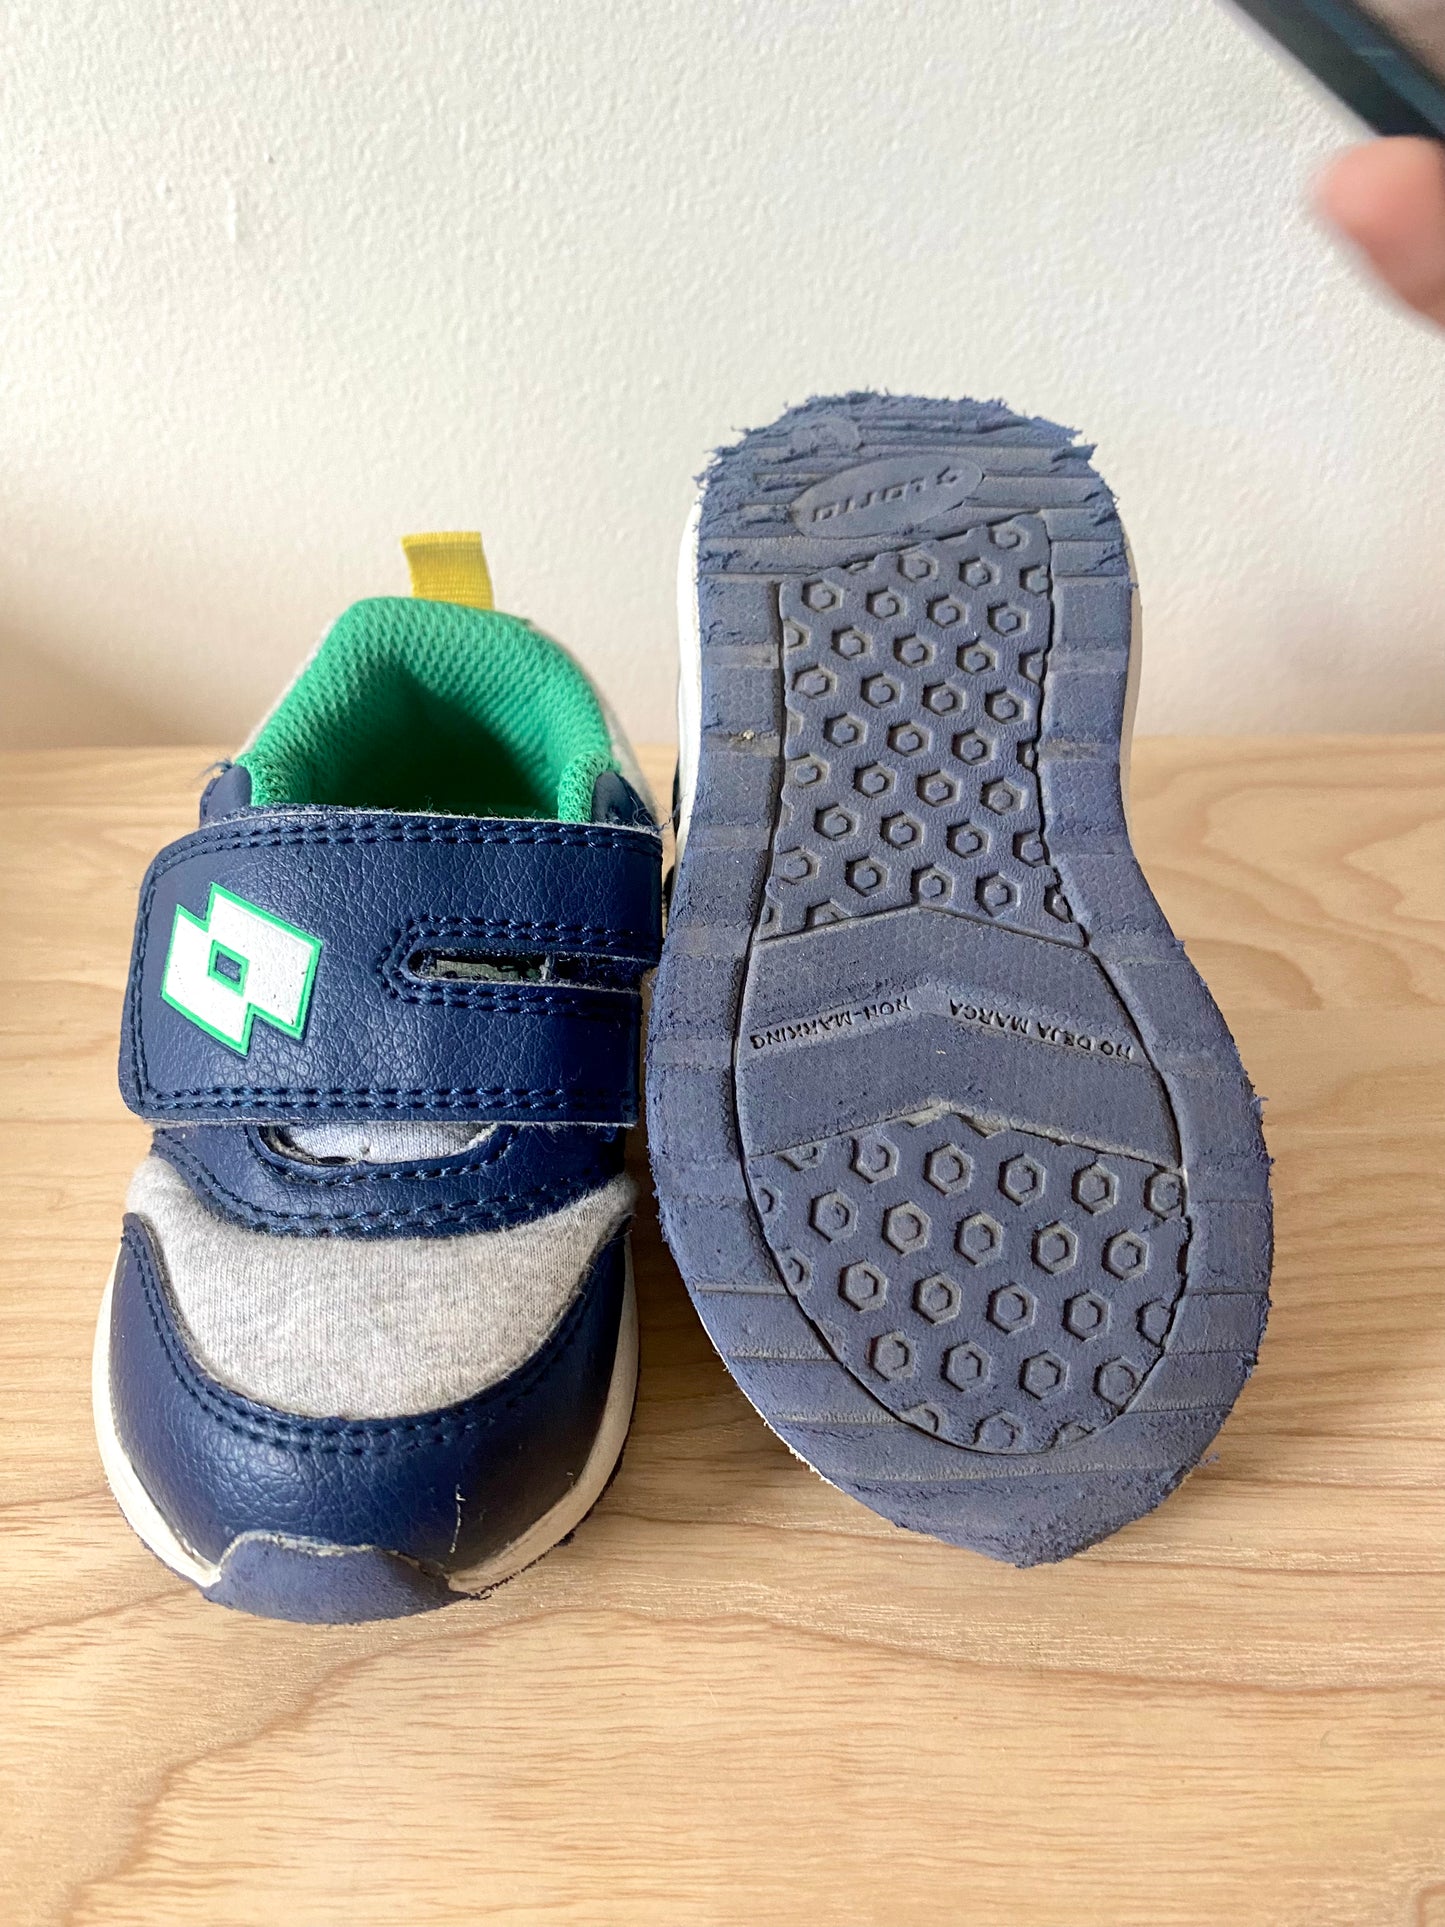 Velcro Lotto Shoes / Size 5 Toddler